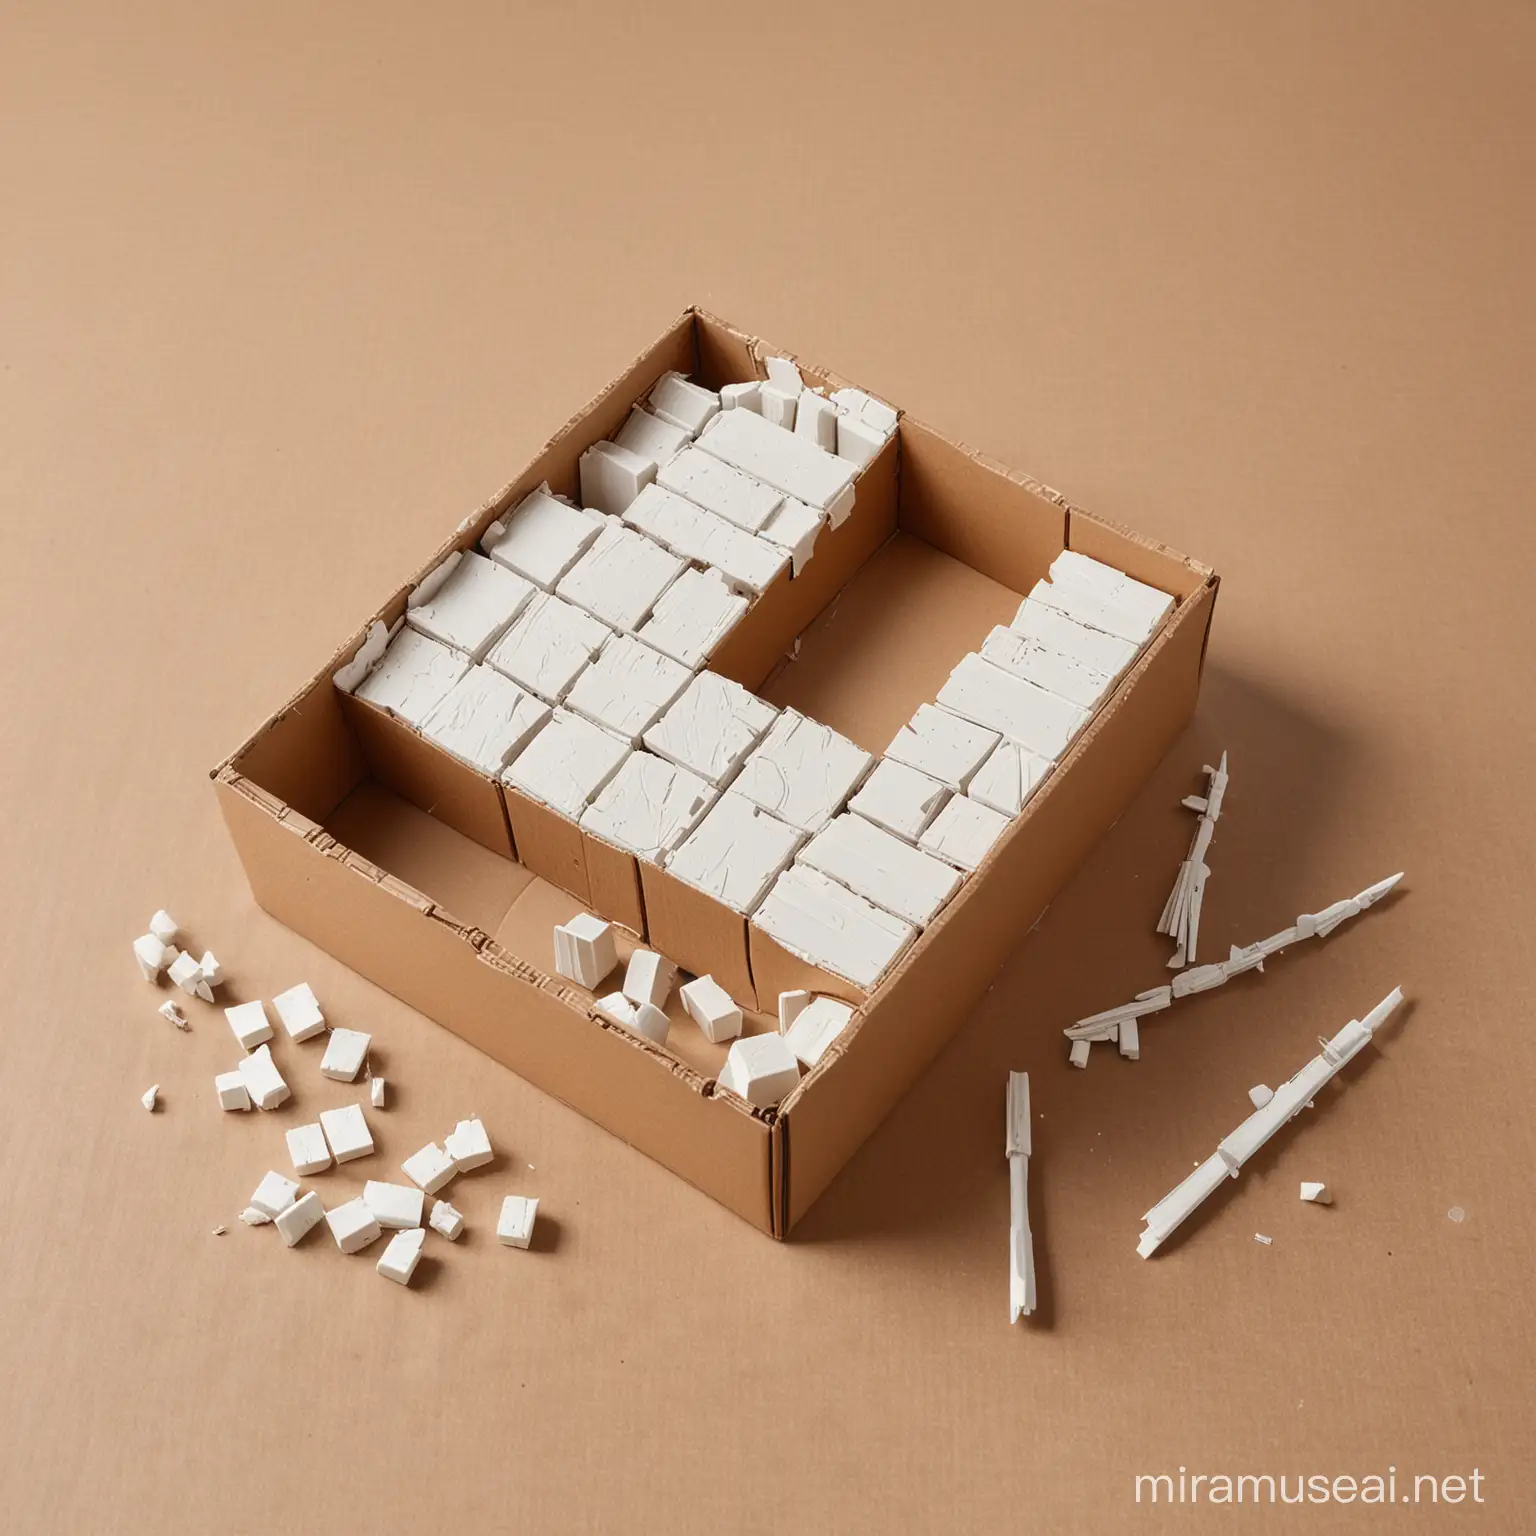 a art kit for children- a box that contains small white bricks, glue, cardboard and brushed in a cardboard box. A concept for brick building kit. Design a packaging for the kit